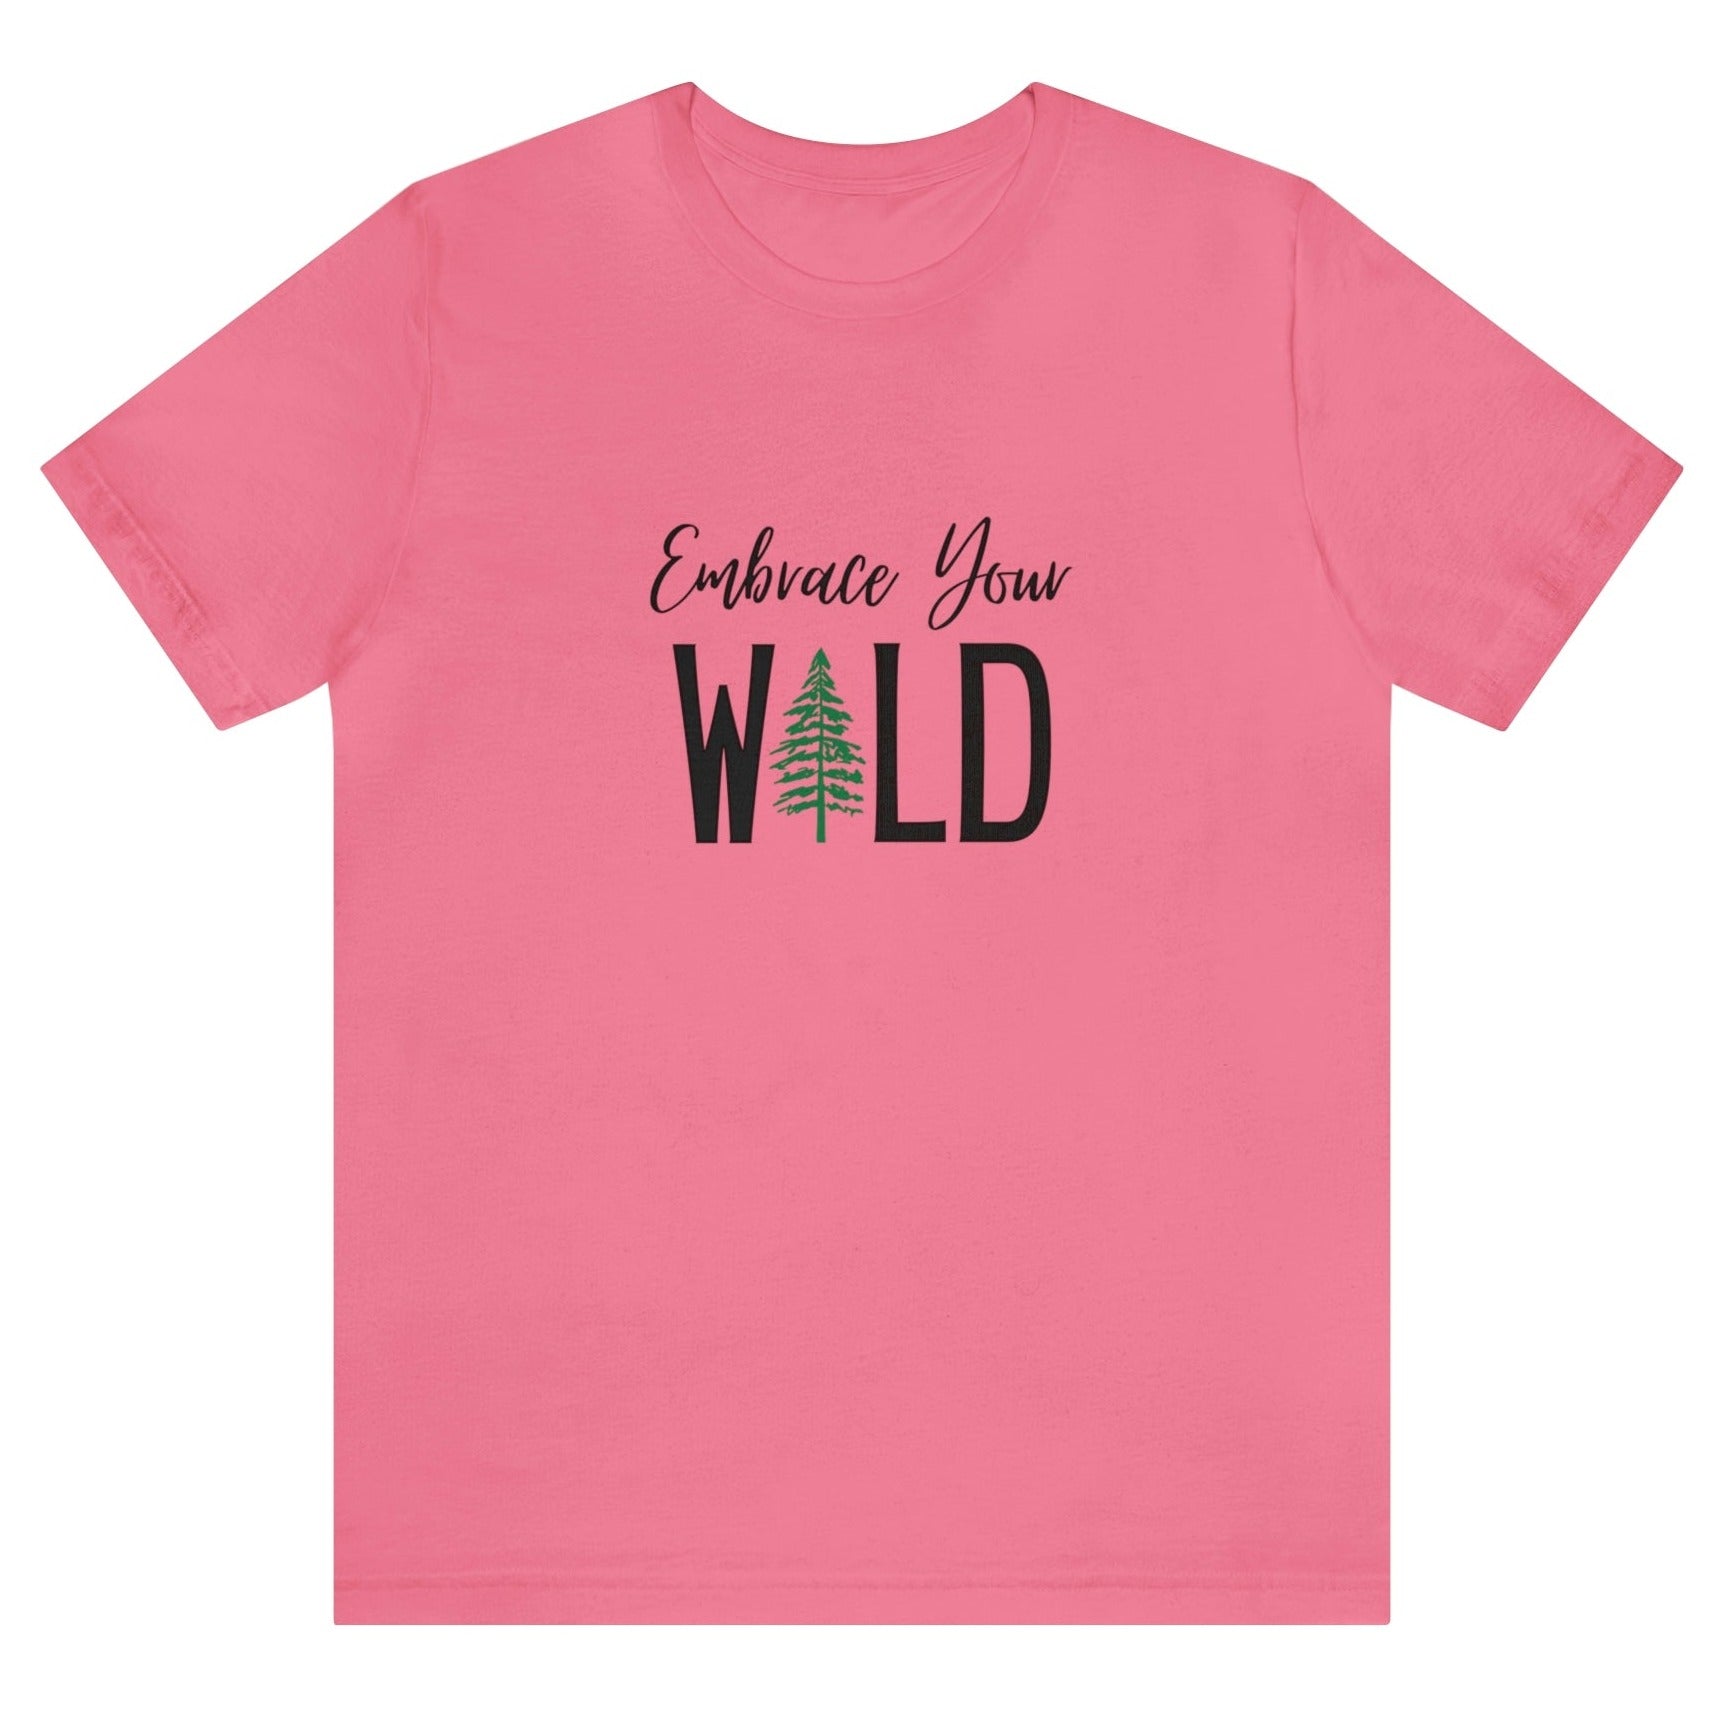 embrace-your-wild-with-tree-graphic-charity-pink-t-shirt-womens-outdoorsembrace-your-wild-with-tree-graphic-charity-pink-t-shirt-womens-outdoors